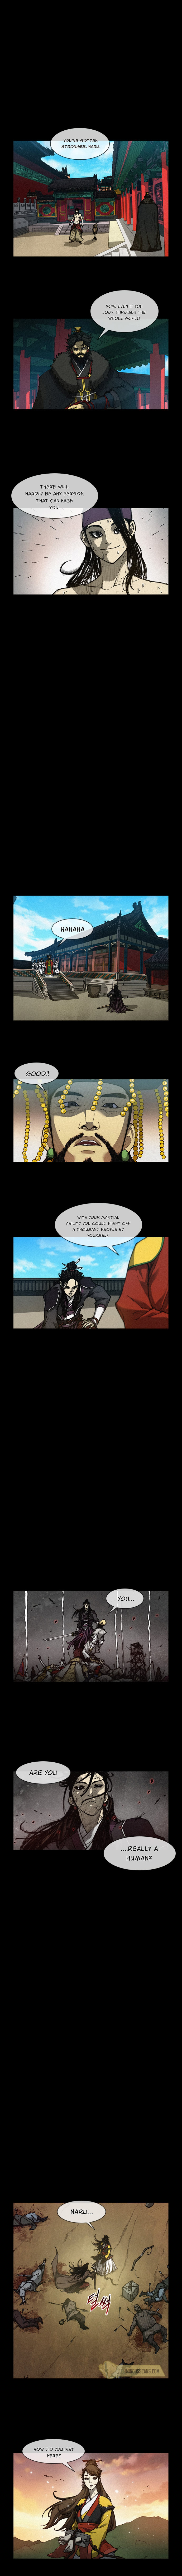 The Long Way Of The Warrior - Chapter 6 Page 2